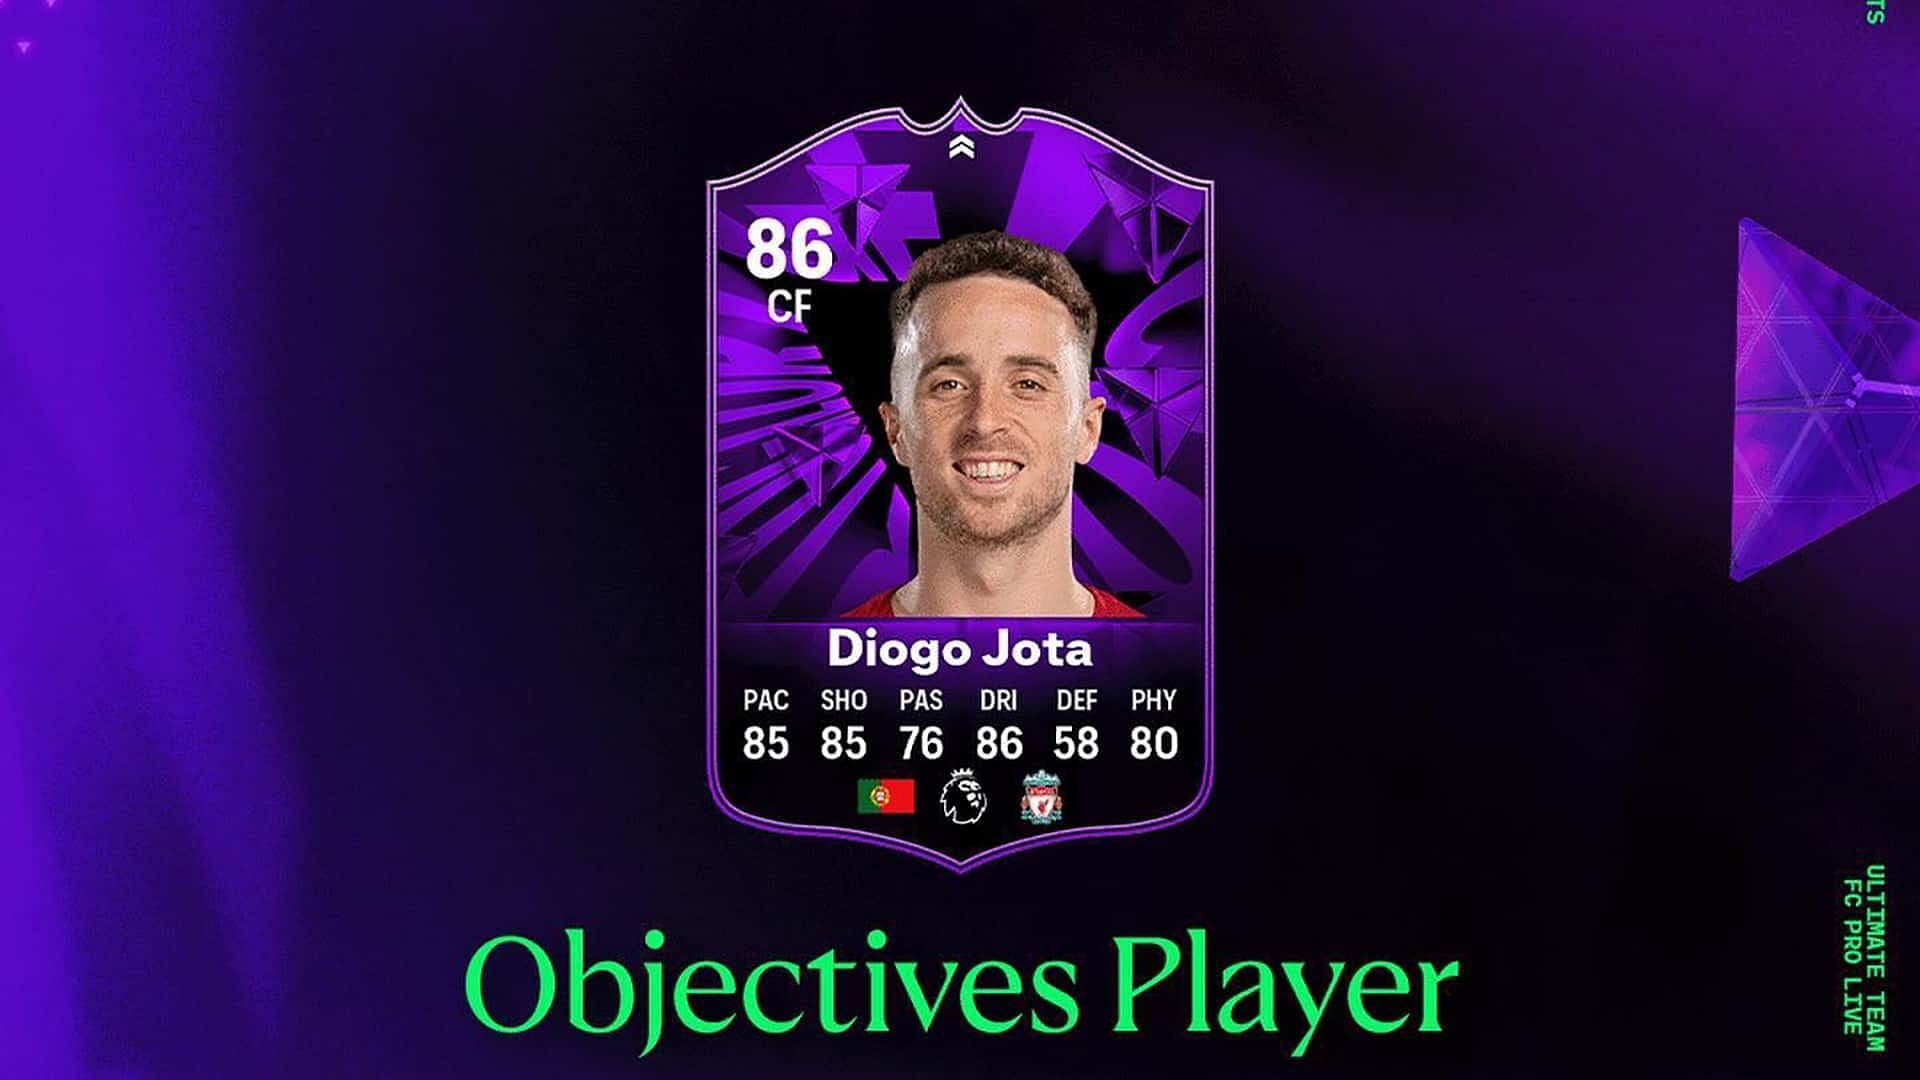 A new Diogo Jota objective card is available in Ultimate Team (Image via EA Sports)